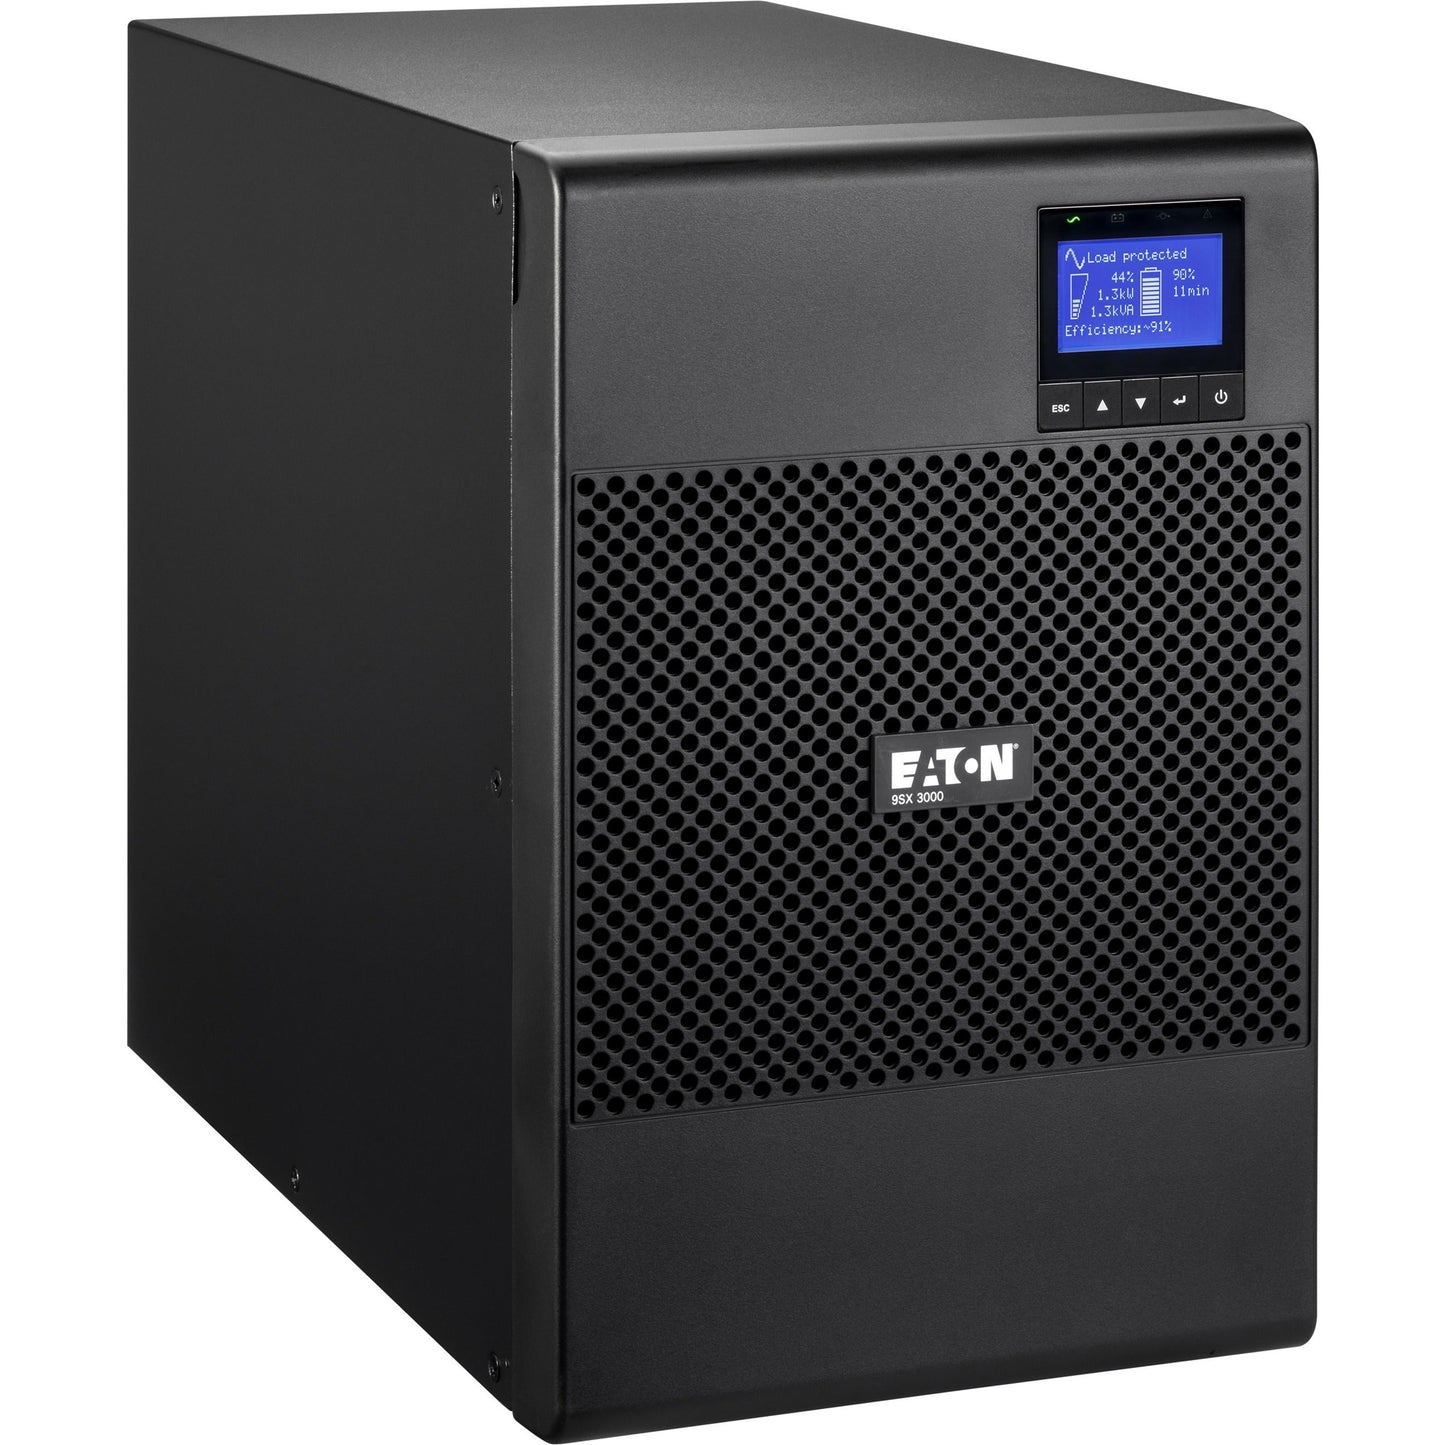 Eaton 9SX 3000VA 2700W 208V Online Double-Conversion UPS - 8 C13 1 C19 Outlets Cybersecure Network Card Option Extended Run Tower